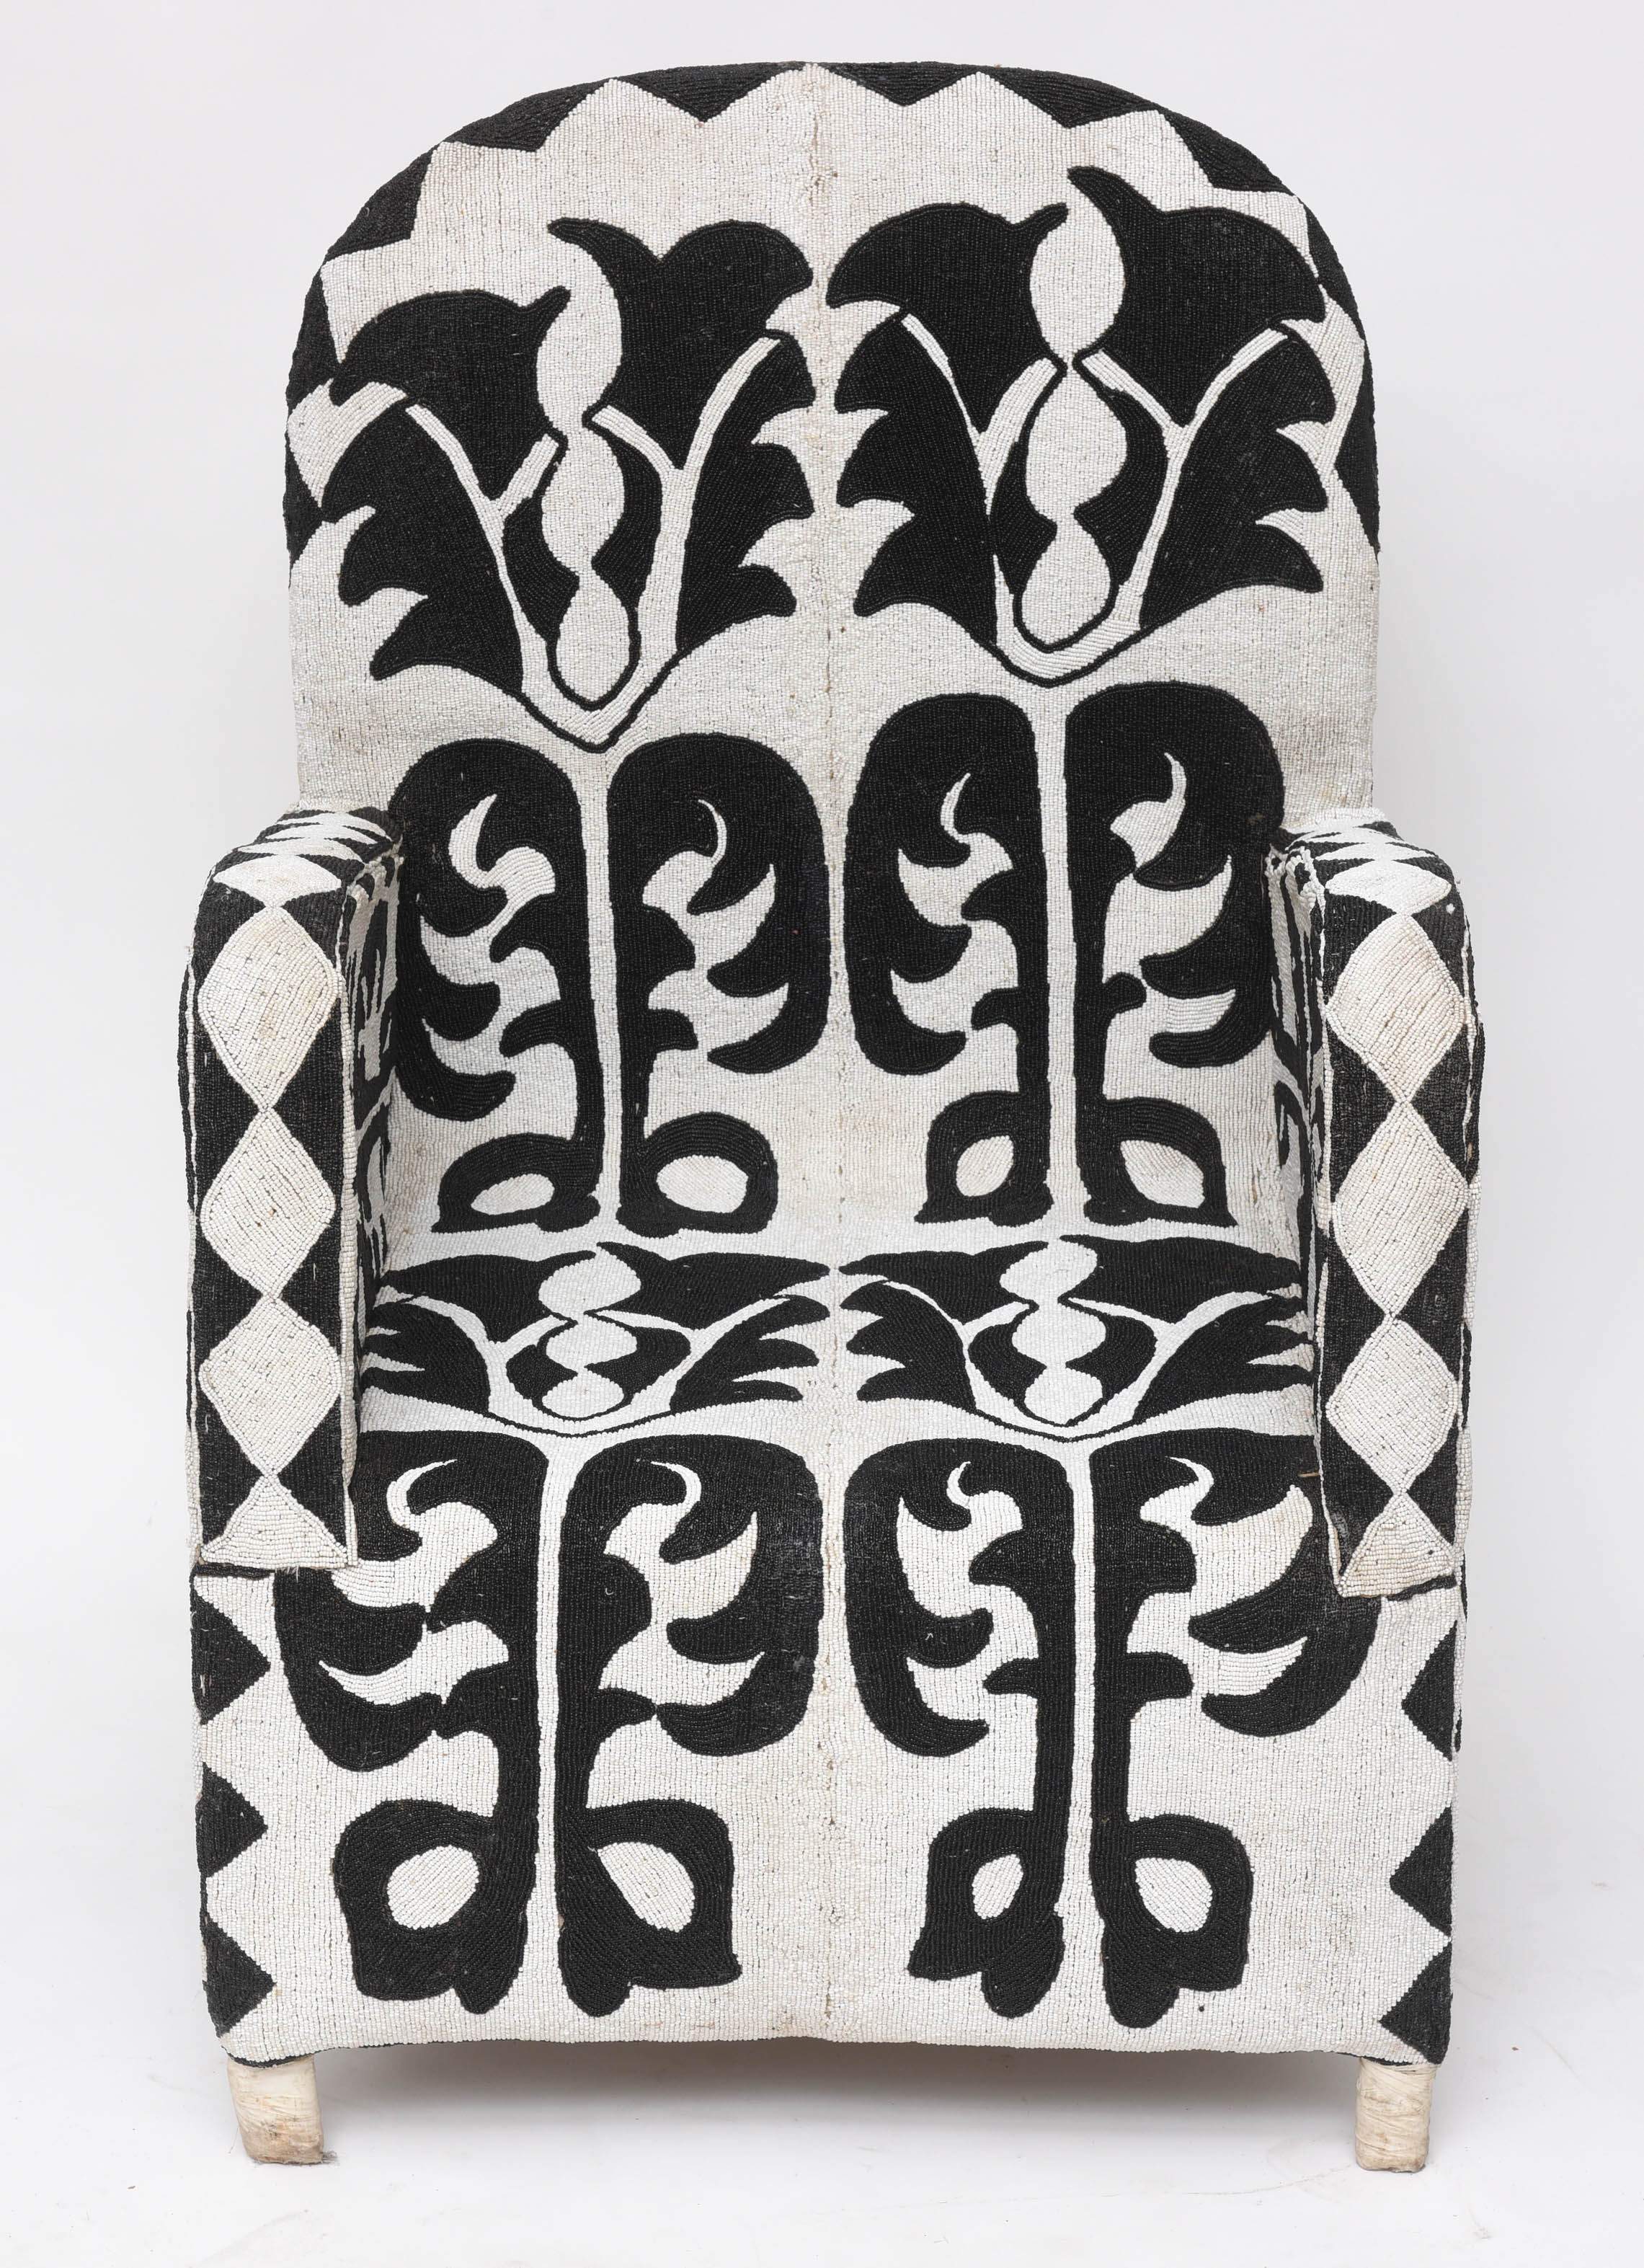 Striking pair of African chairs with a graphic abstract pattern, painstakingly executed in black and white glass beads over a wood and canvas frame.